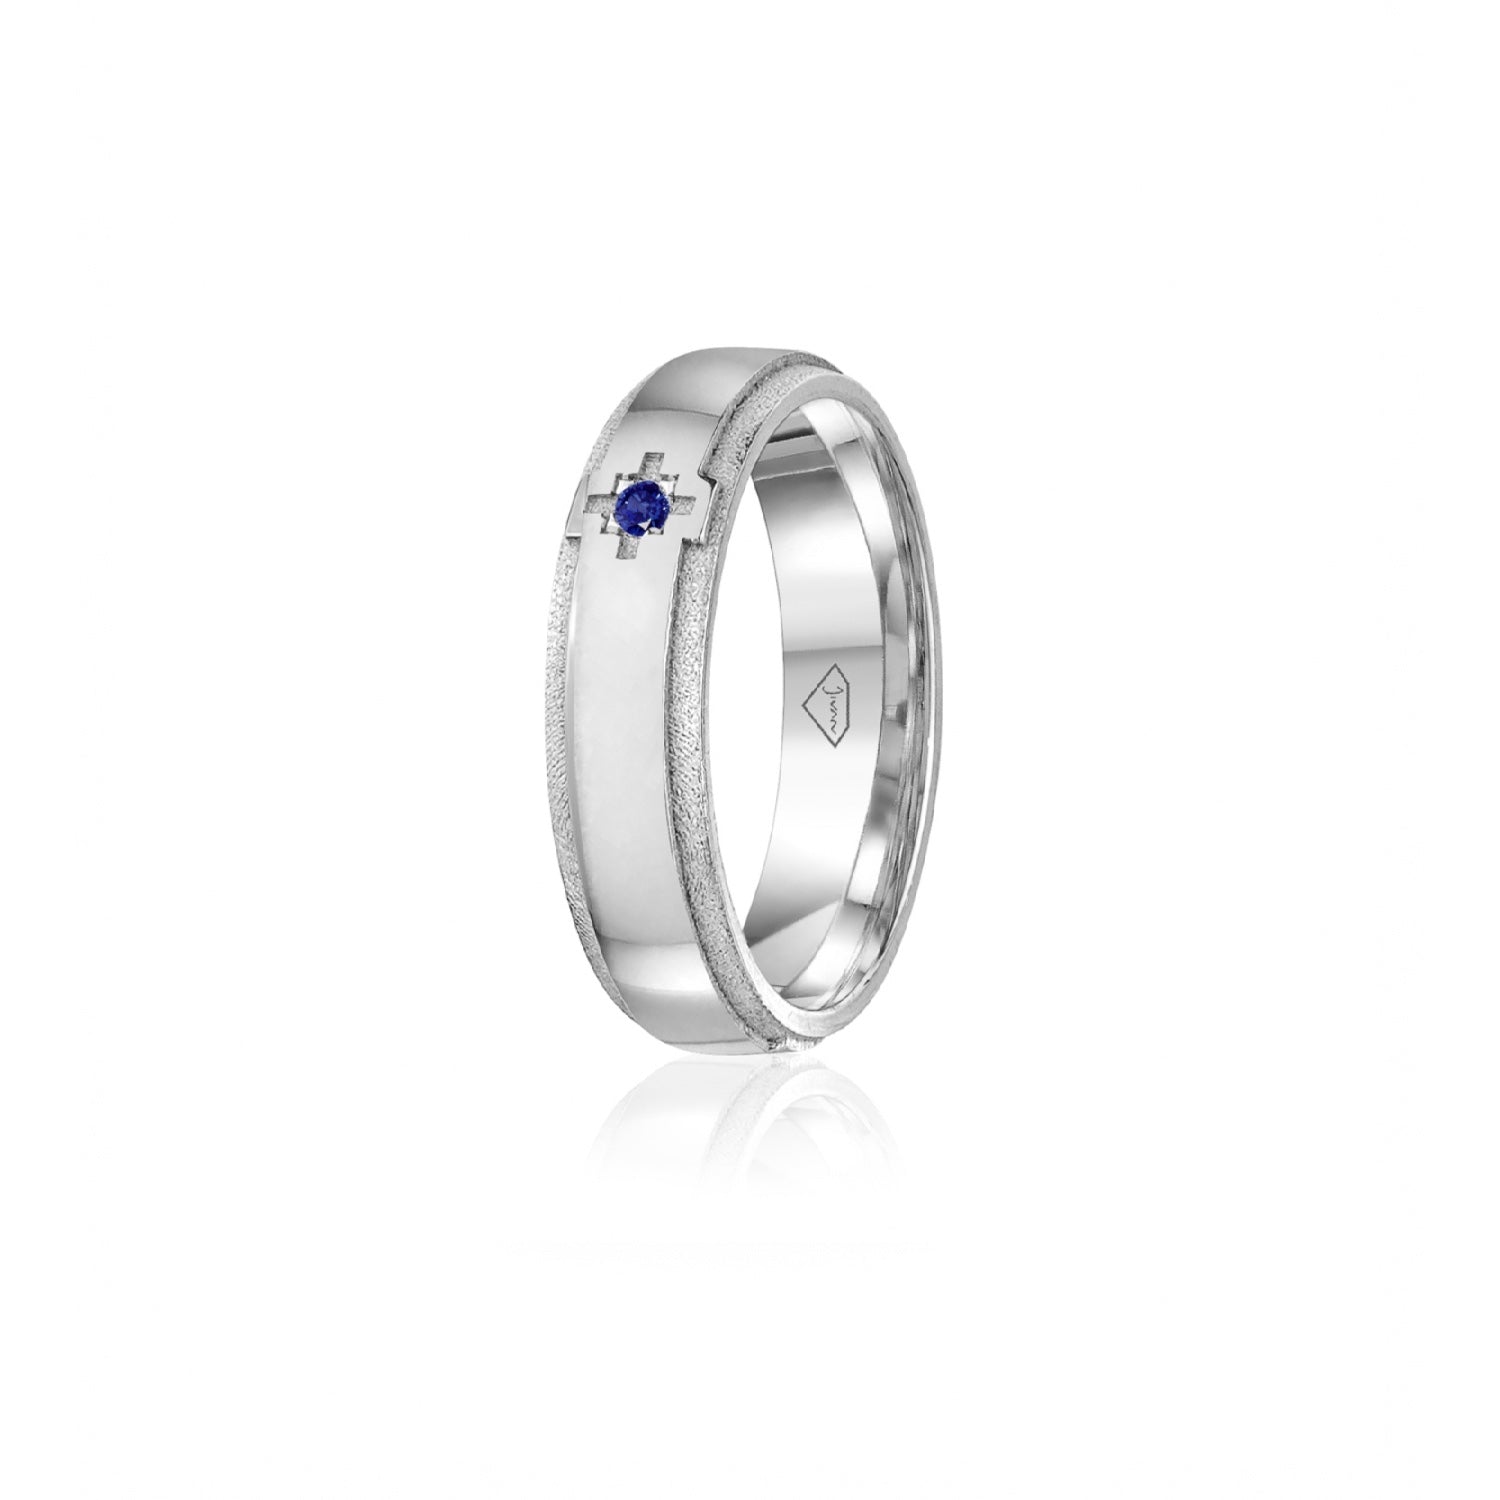 Sapphire Accent Polished Finish Bevelled Edge 6-7 mm Wedding Ring in White Gold